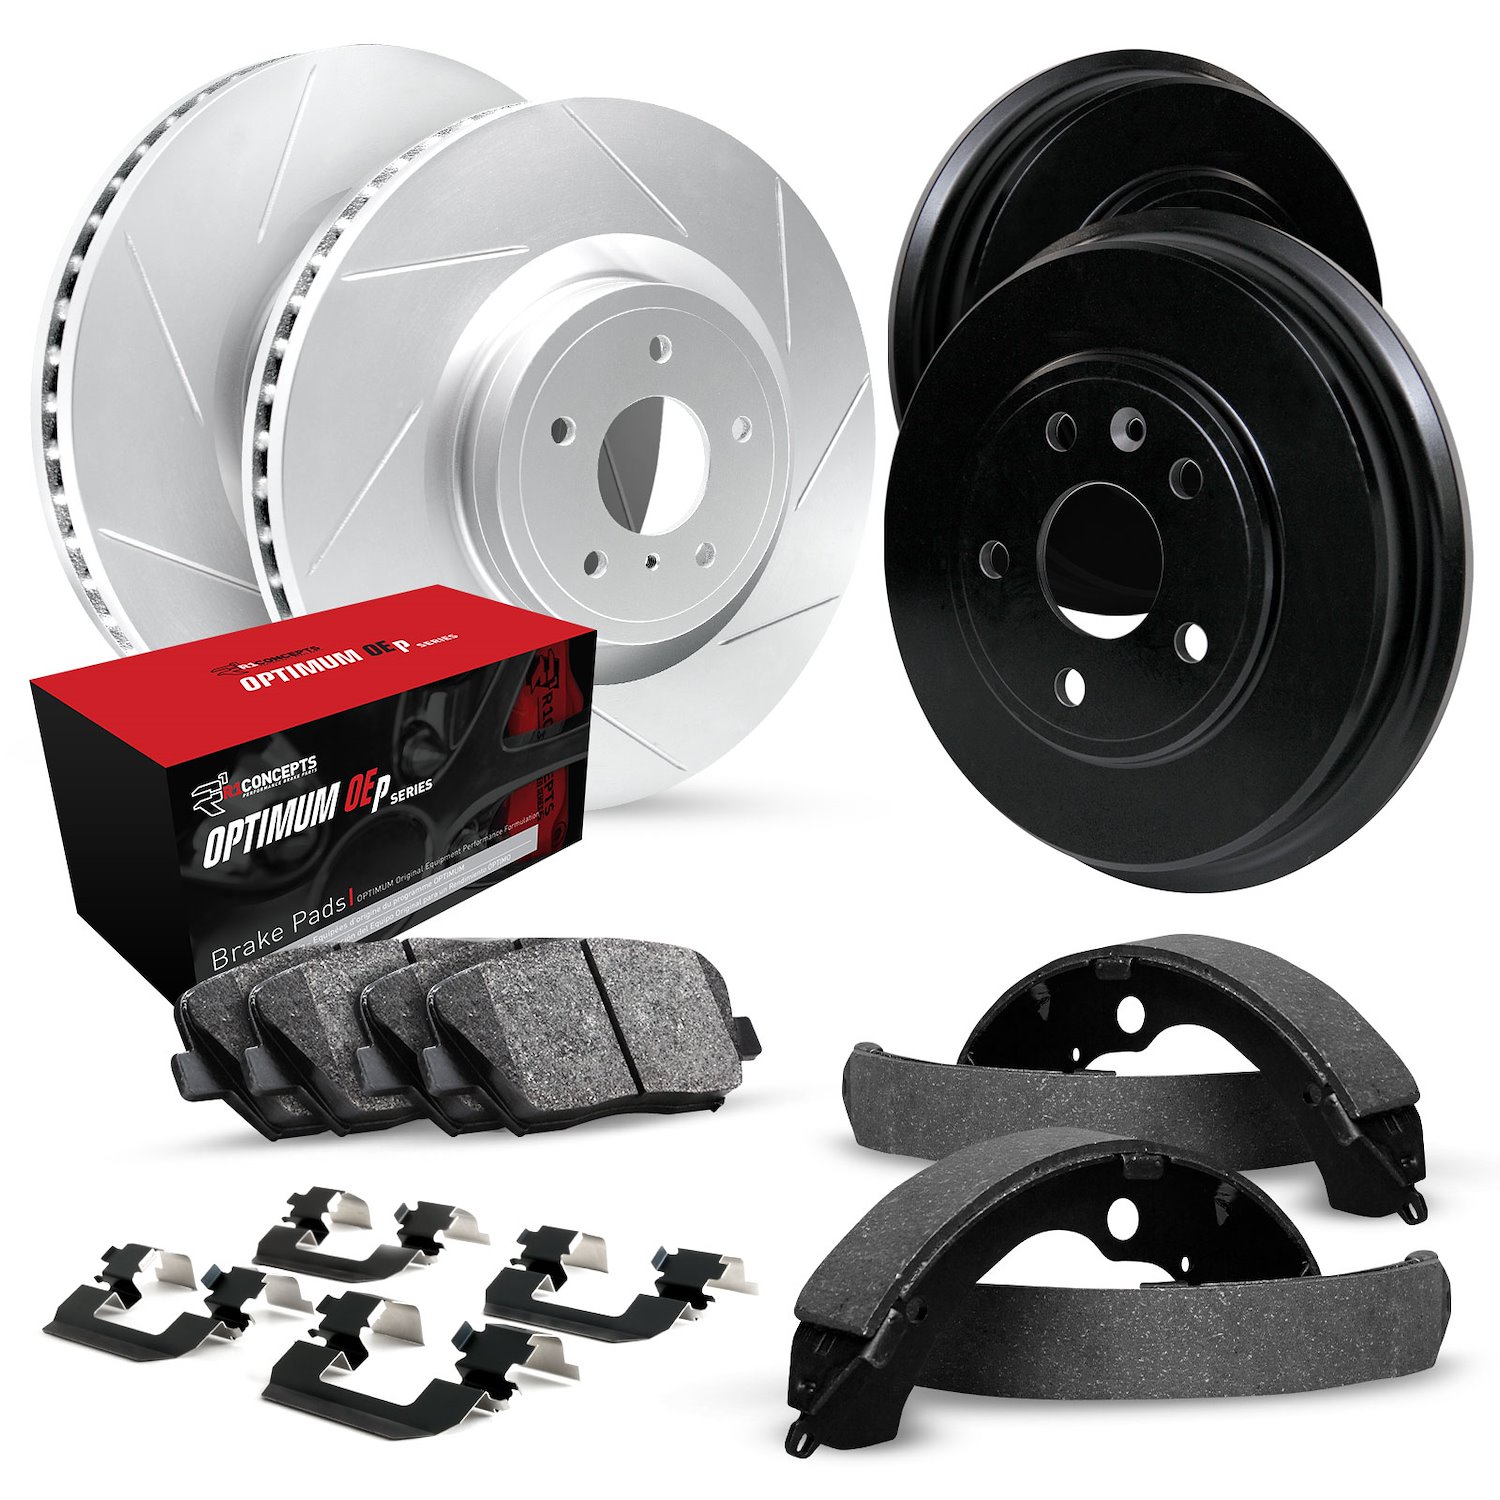 GEO-Carbon Slotted Brake Rotor & Drum Set w/Optimum OE Pads, Shoes, & Hardware, 1981-1992 GM, Position: Front & Rear